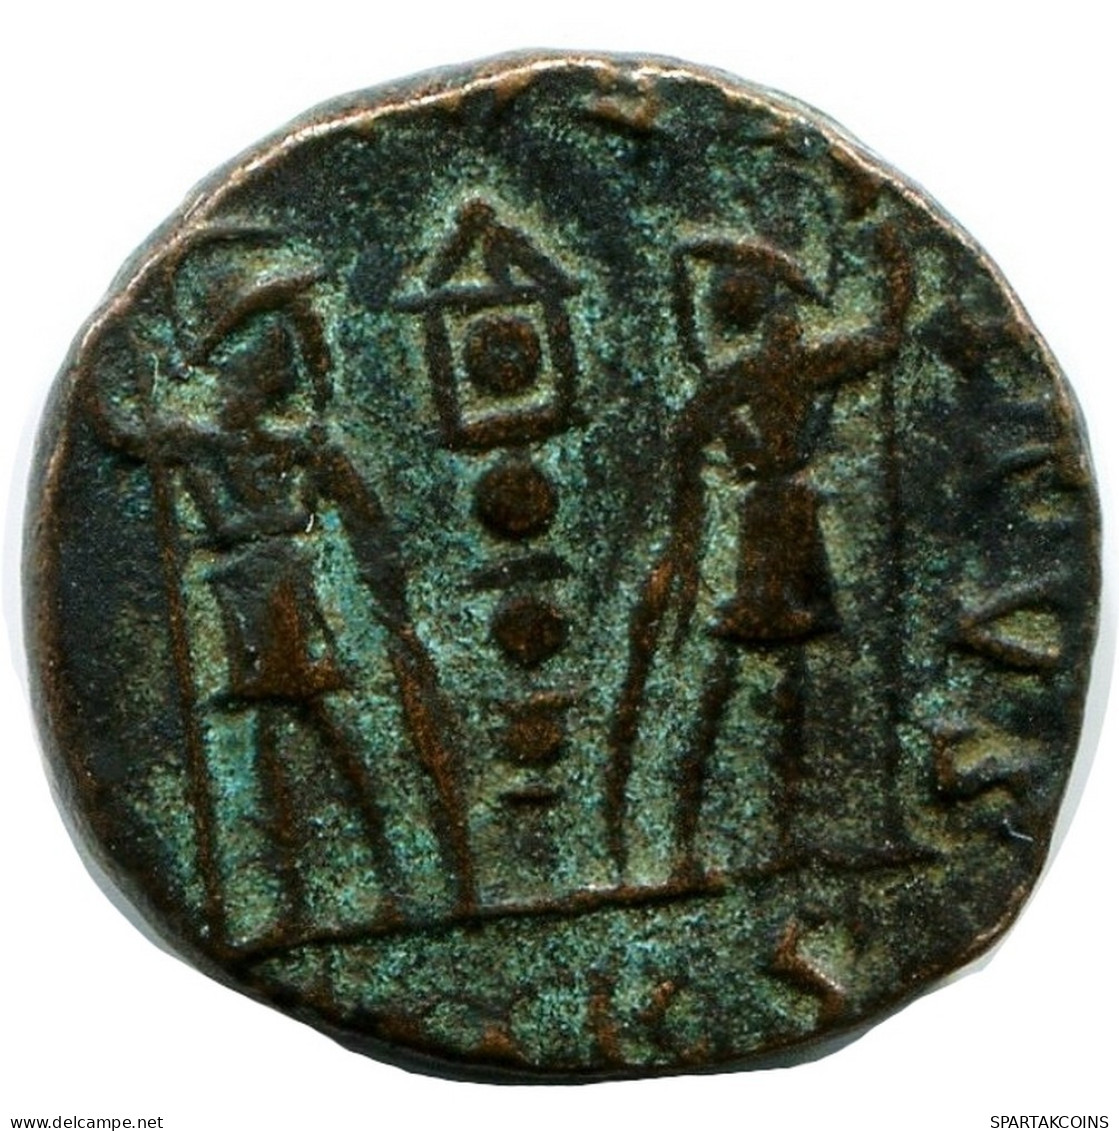 CONSTANS MINTED IN CYZICUS FOUND IN IHNASYAH HOARD EGYPT #ANC11679.14.E.A - El Impero Christiano (307 / 363)